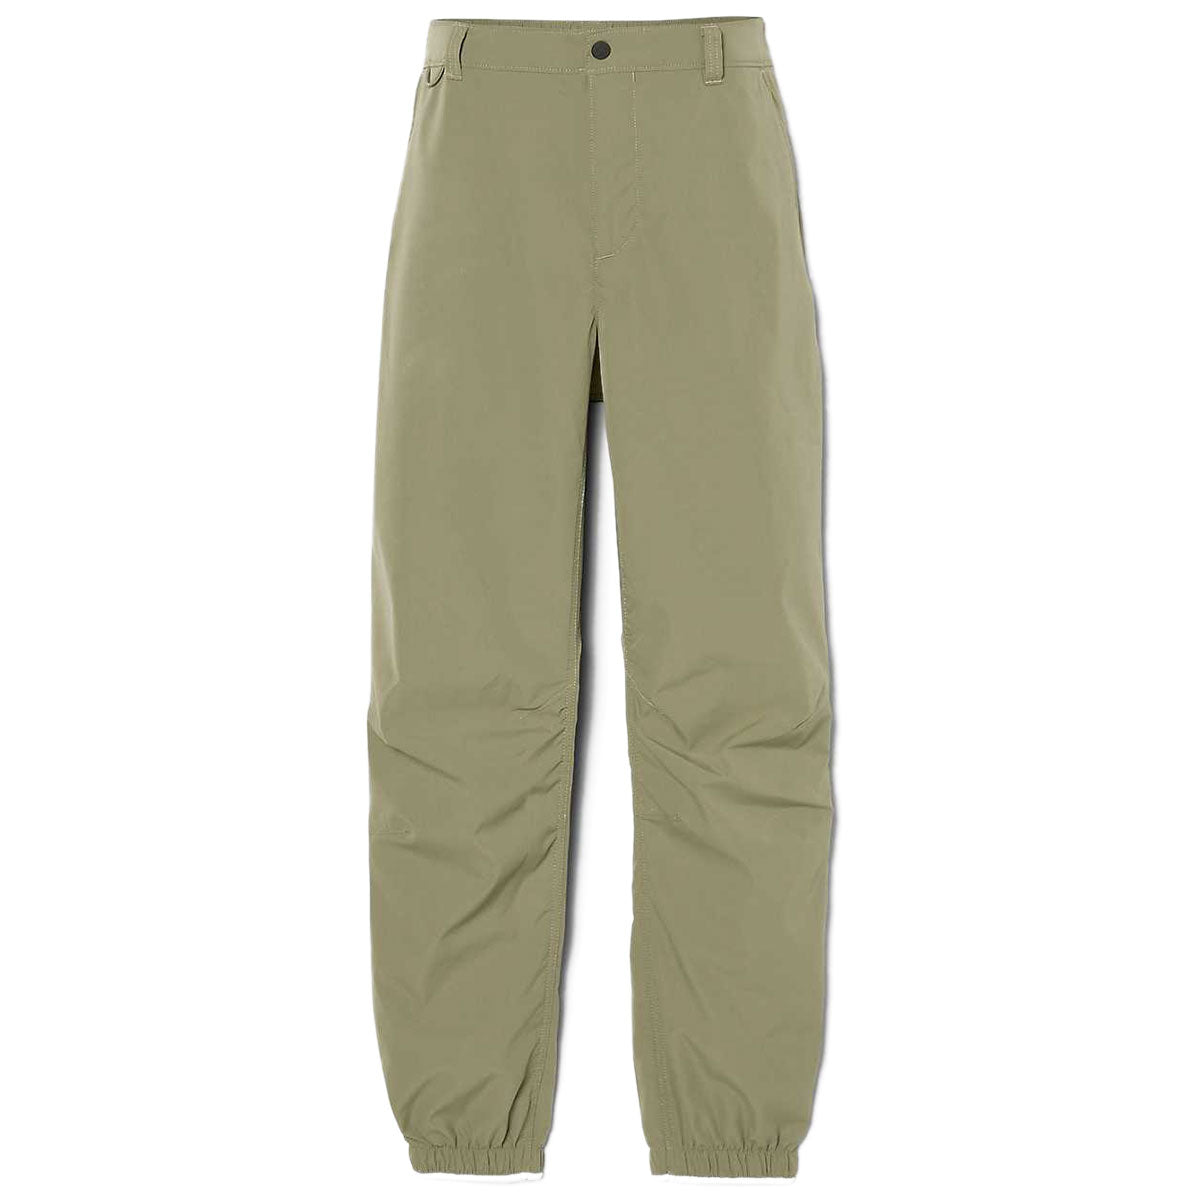 Timberland Dwr Jogger  Pants - Cassel Earth image 5